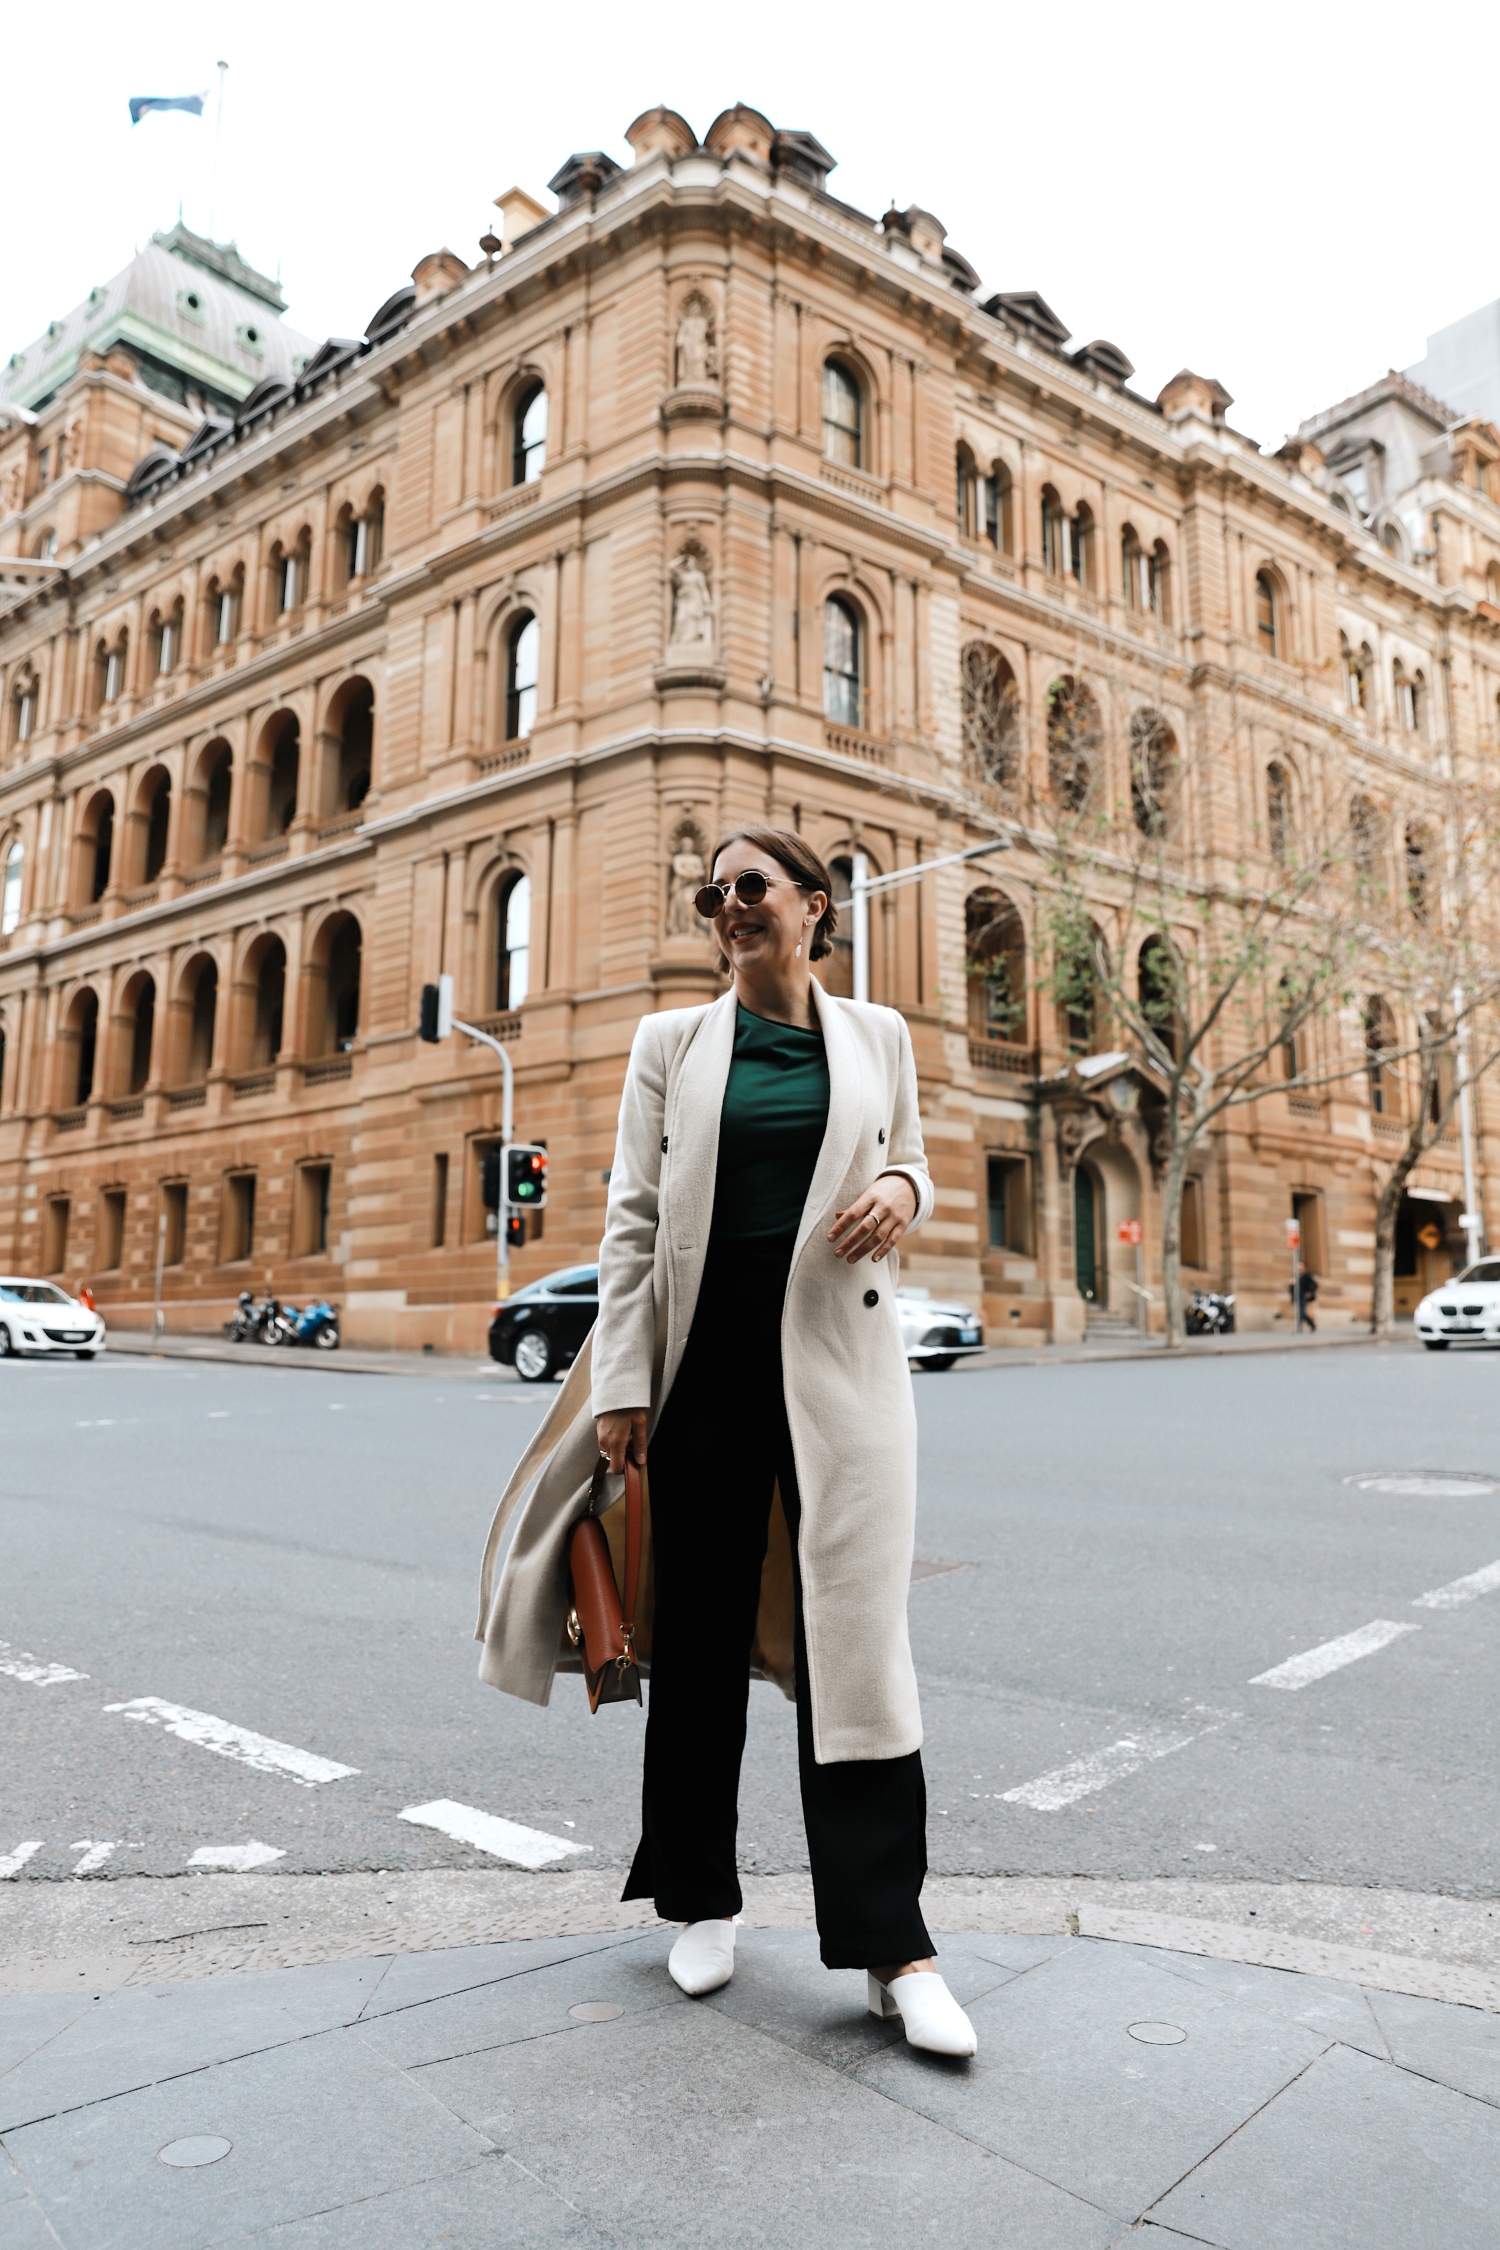 SHEIN MOTF Collection Review - Australia - Leather and Lattes